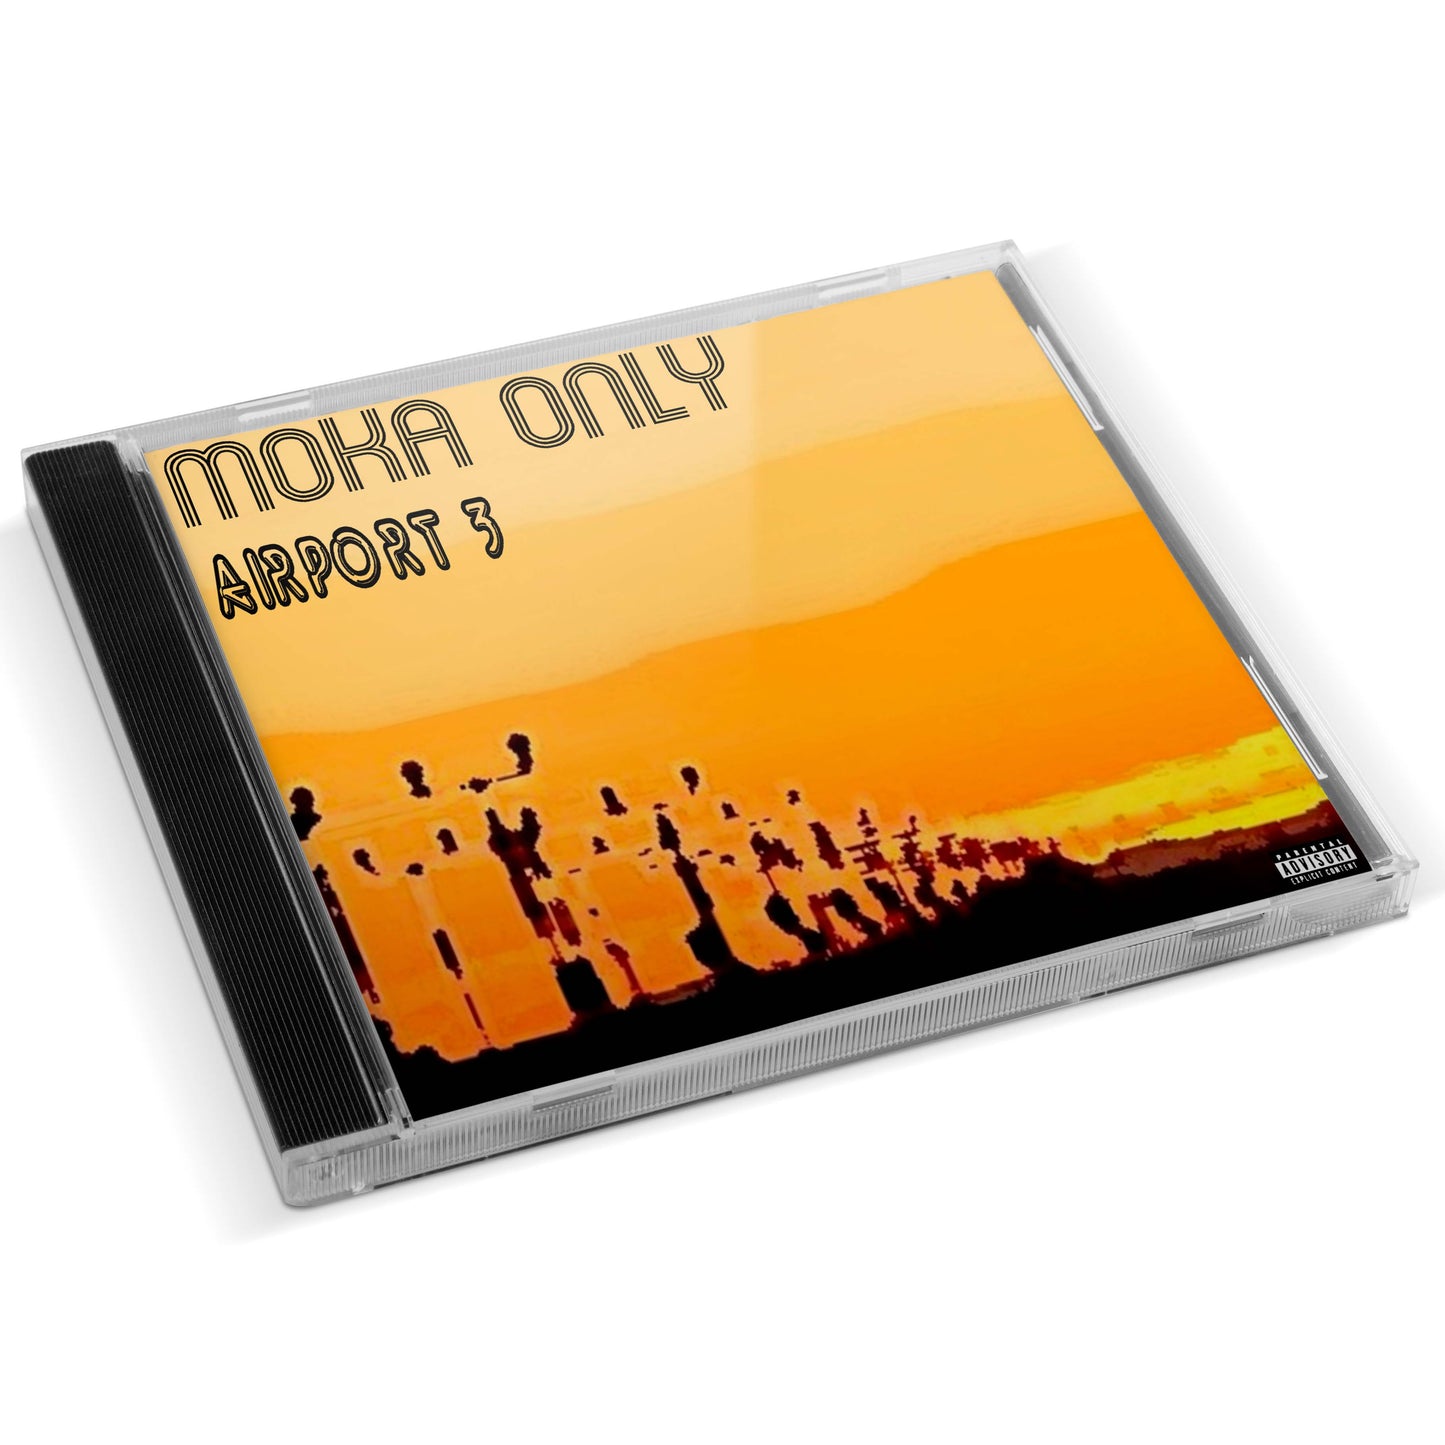 Moka Only - Airport 3 CD